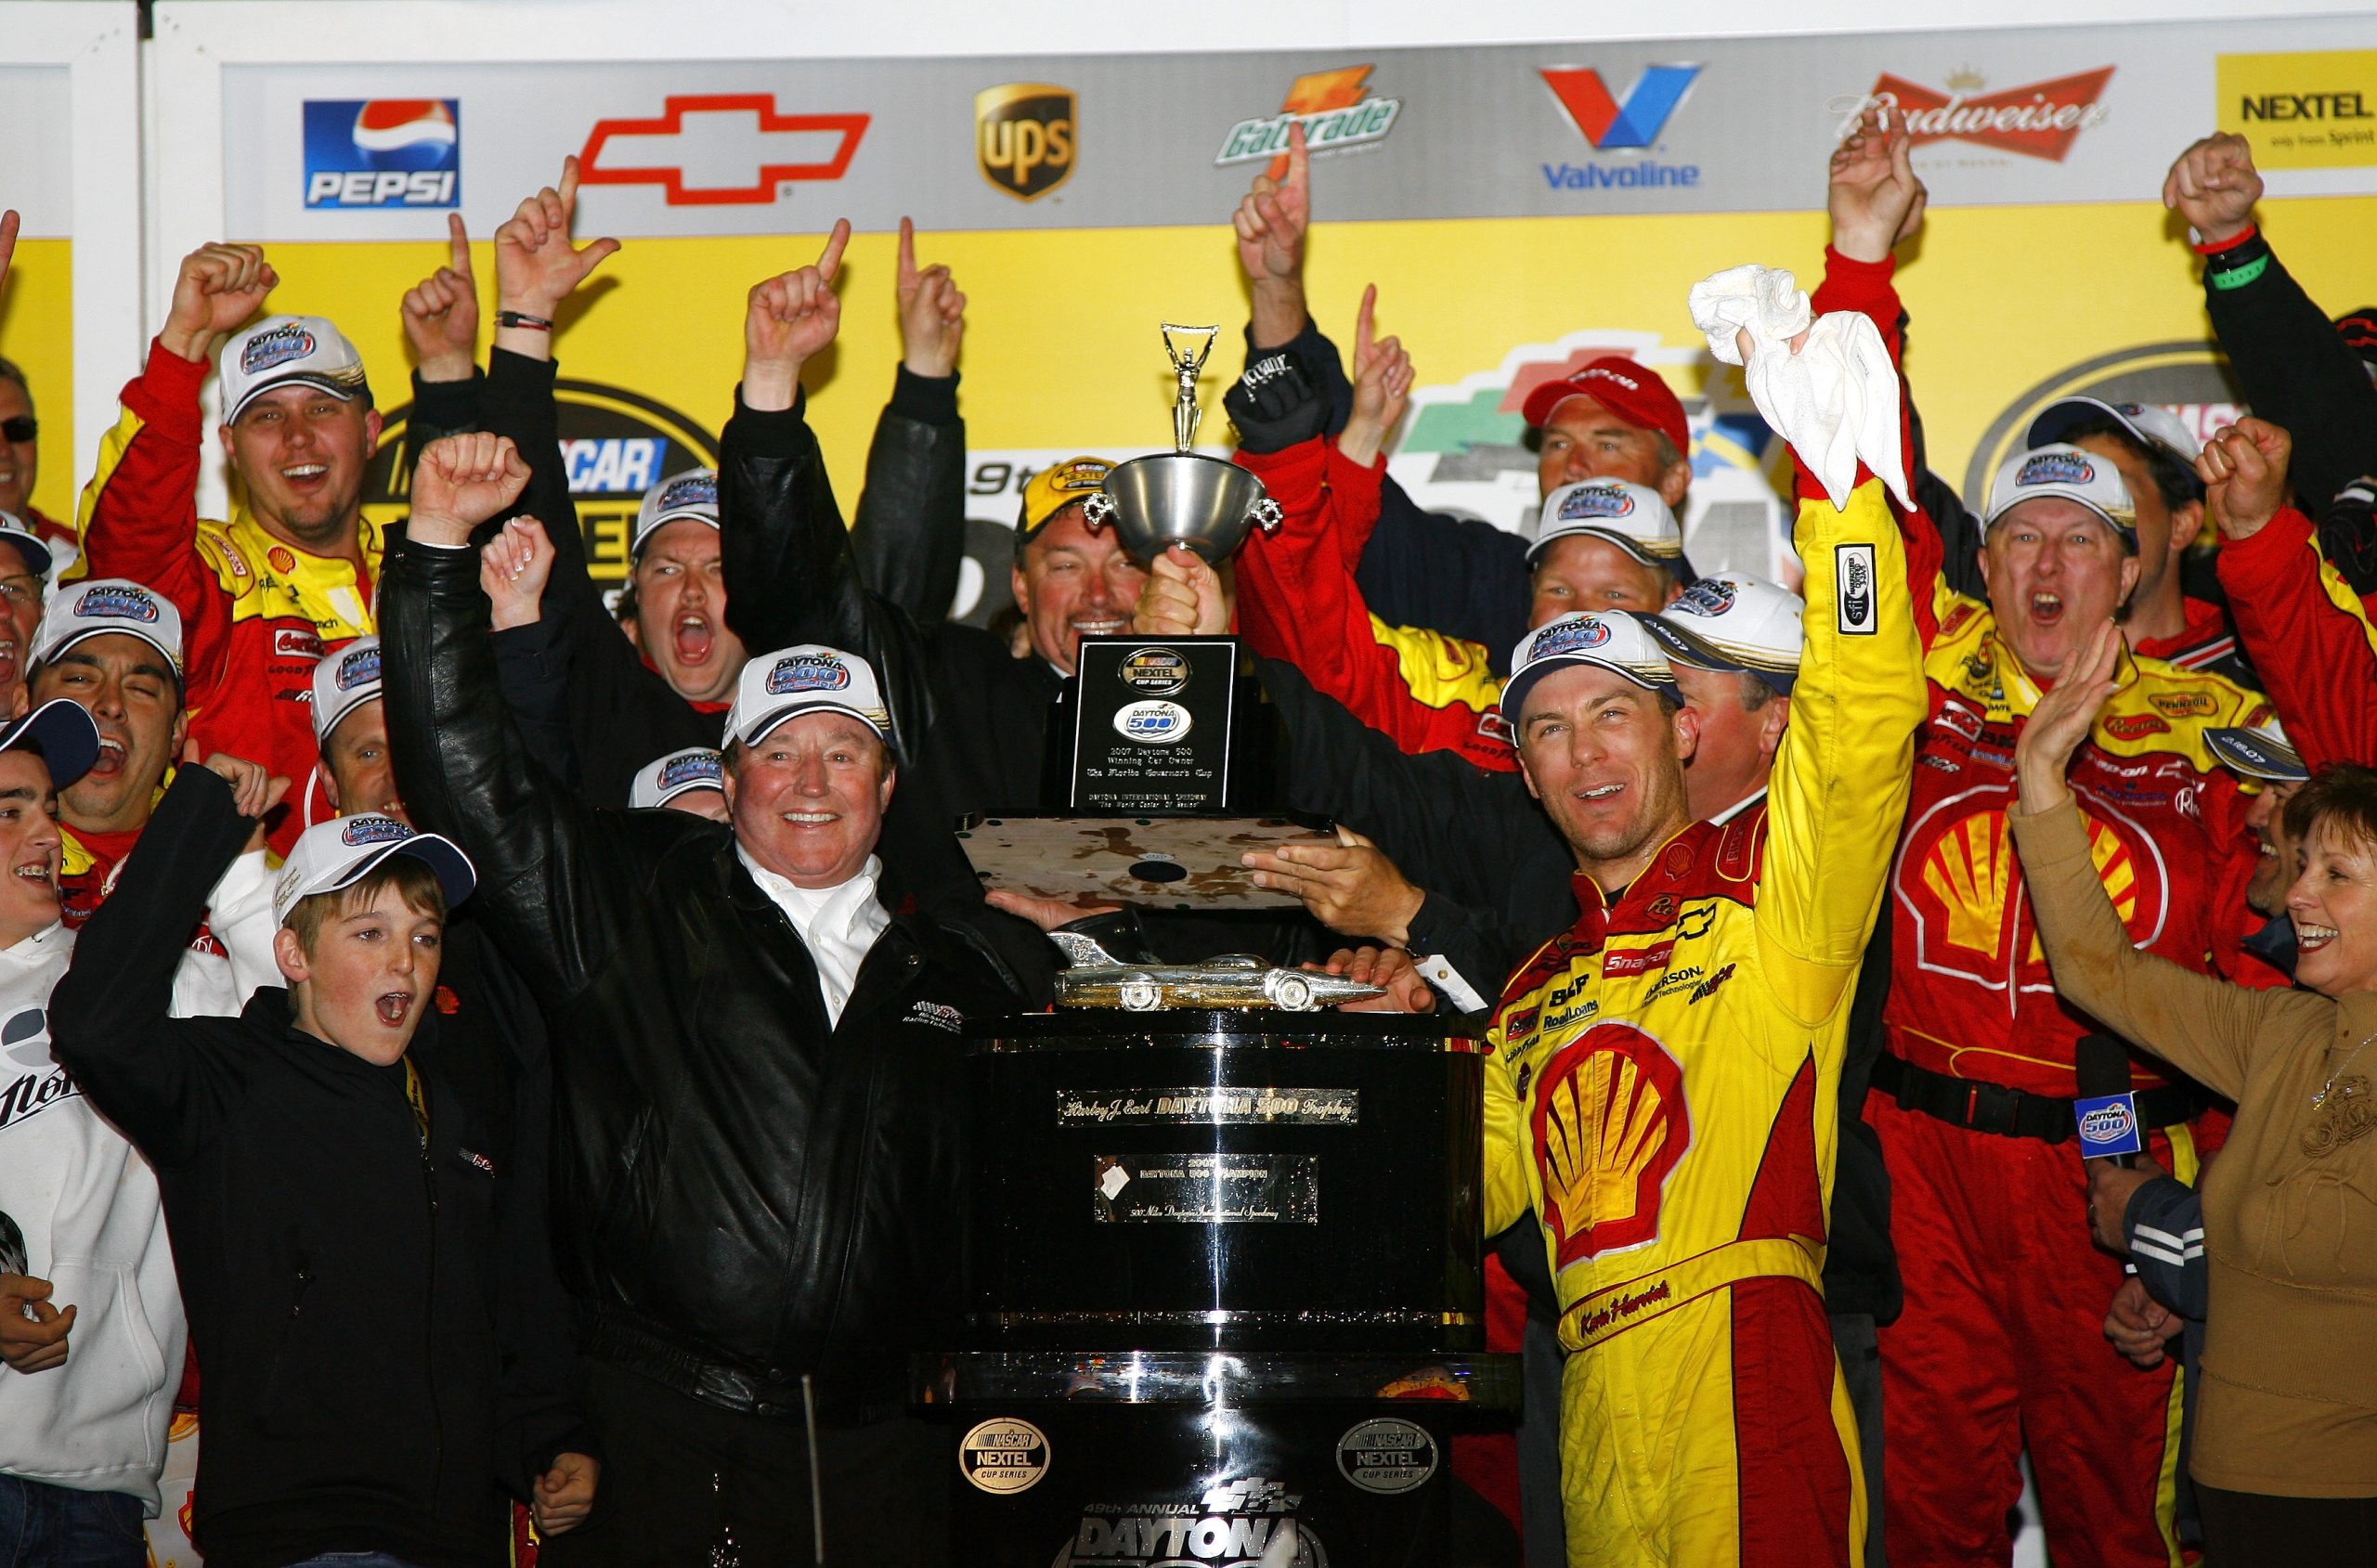 DAYTONA, FL - FEBRUARY 18: Kevin Harvick (R), driver of the #29 Shell/Pennzoil Chevrolet, and team owner Richard Childress, celebrate in victory lane with team members, after winning the NASCAR Nextel Cup Series Daytona 500 at Daytona International Speedway on February 18, 2007 in Daytona, Florida. (Photo by Rusty Jarrett/Getty Images for NASCAR)